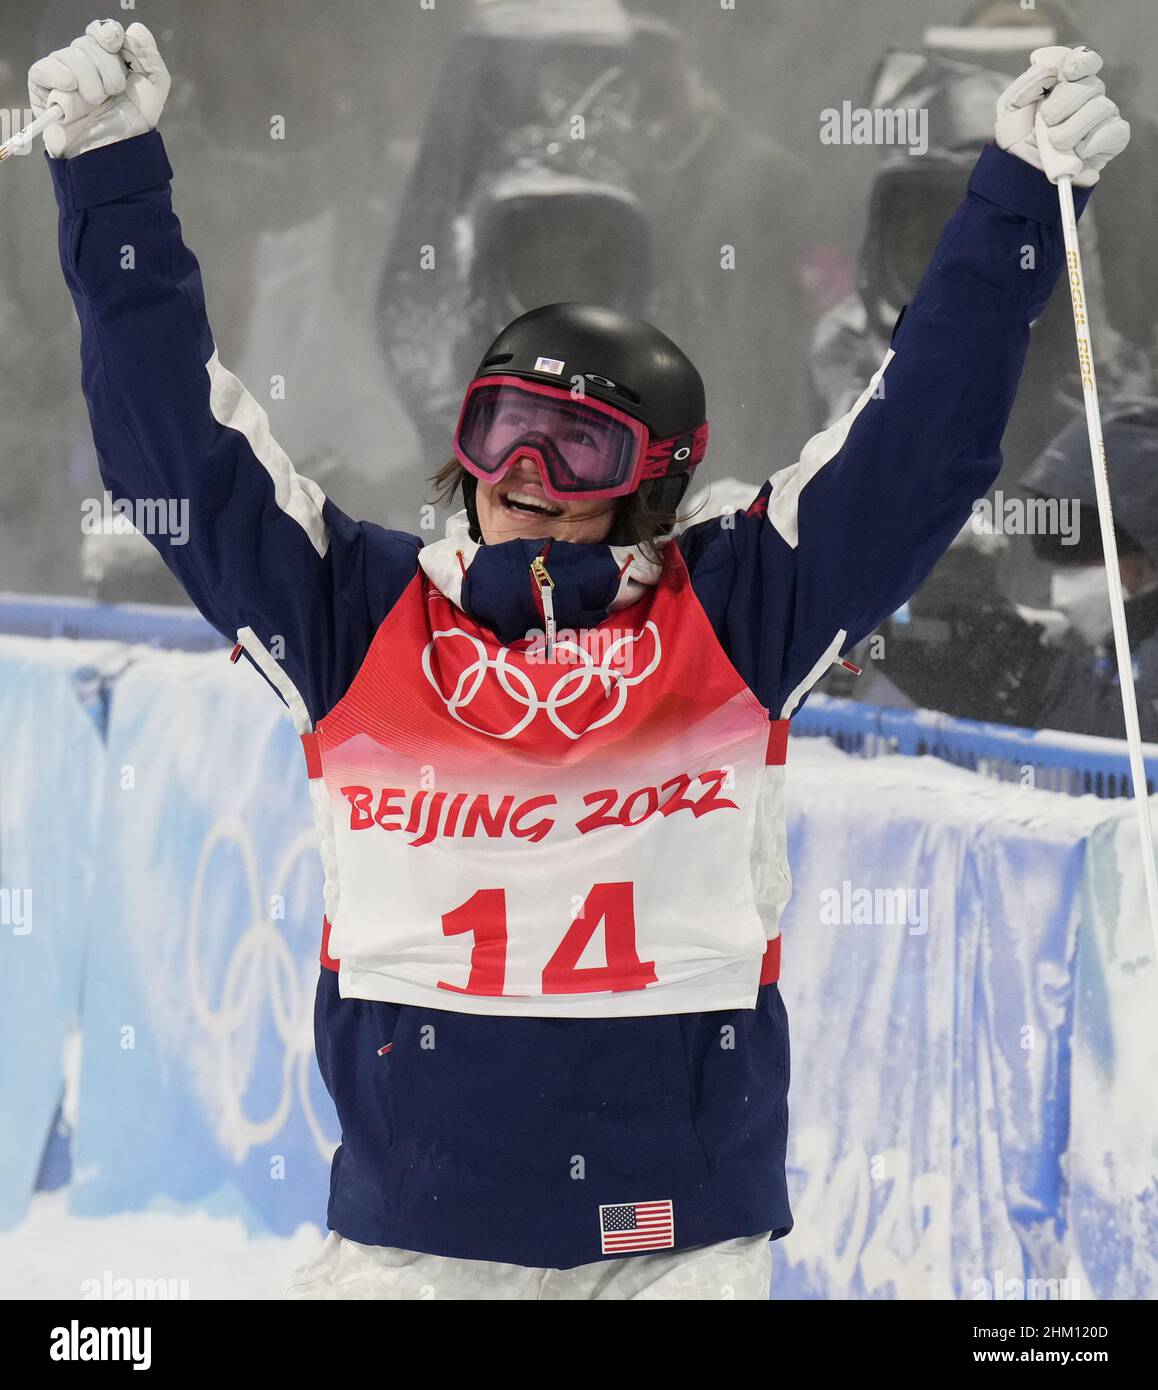 Zhangjiakou, China. 06th Feb, 2022. Jaelin Kauf of the United States reacts after winning the silver medal in the Women's Moguls Freestyle Skiing competition during the 2022 Winter Olympics at Genting Snow Park in Zhangjiakou, China on Sunday, February 6, 2022. Jakara Anthony of Australia won the gold medal and Anastasiia Smirnova of Russia took the bronze. Photo by Bob Strong/UPI Credit: UPI/Alamy Live News Stock Photo